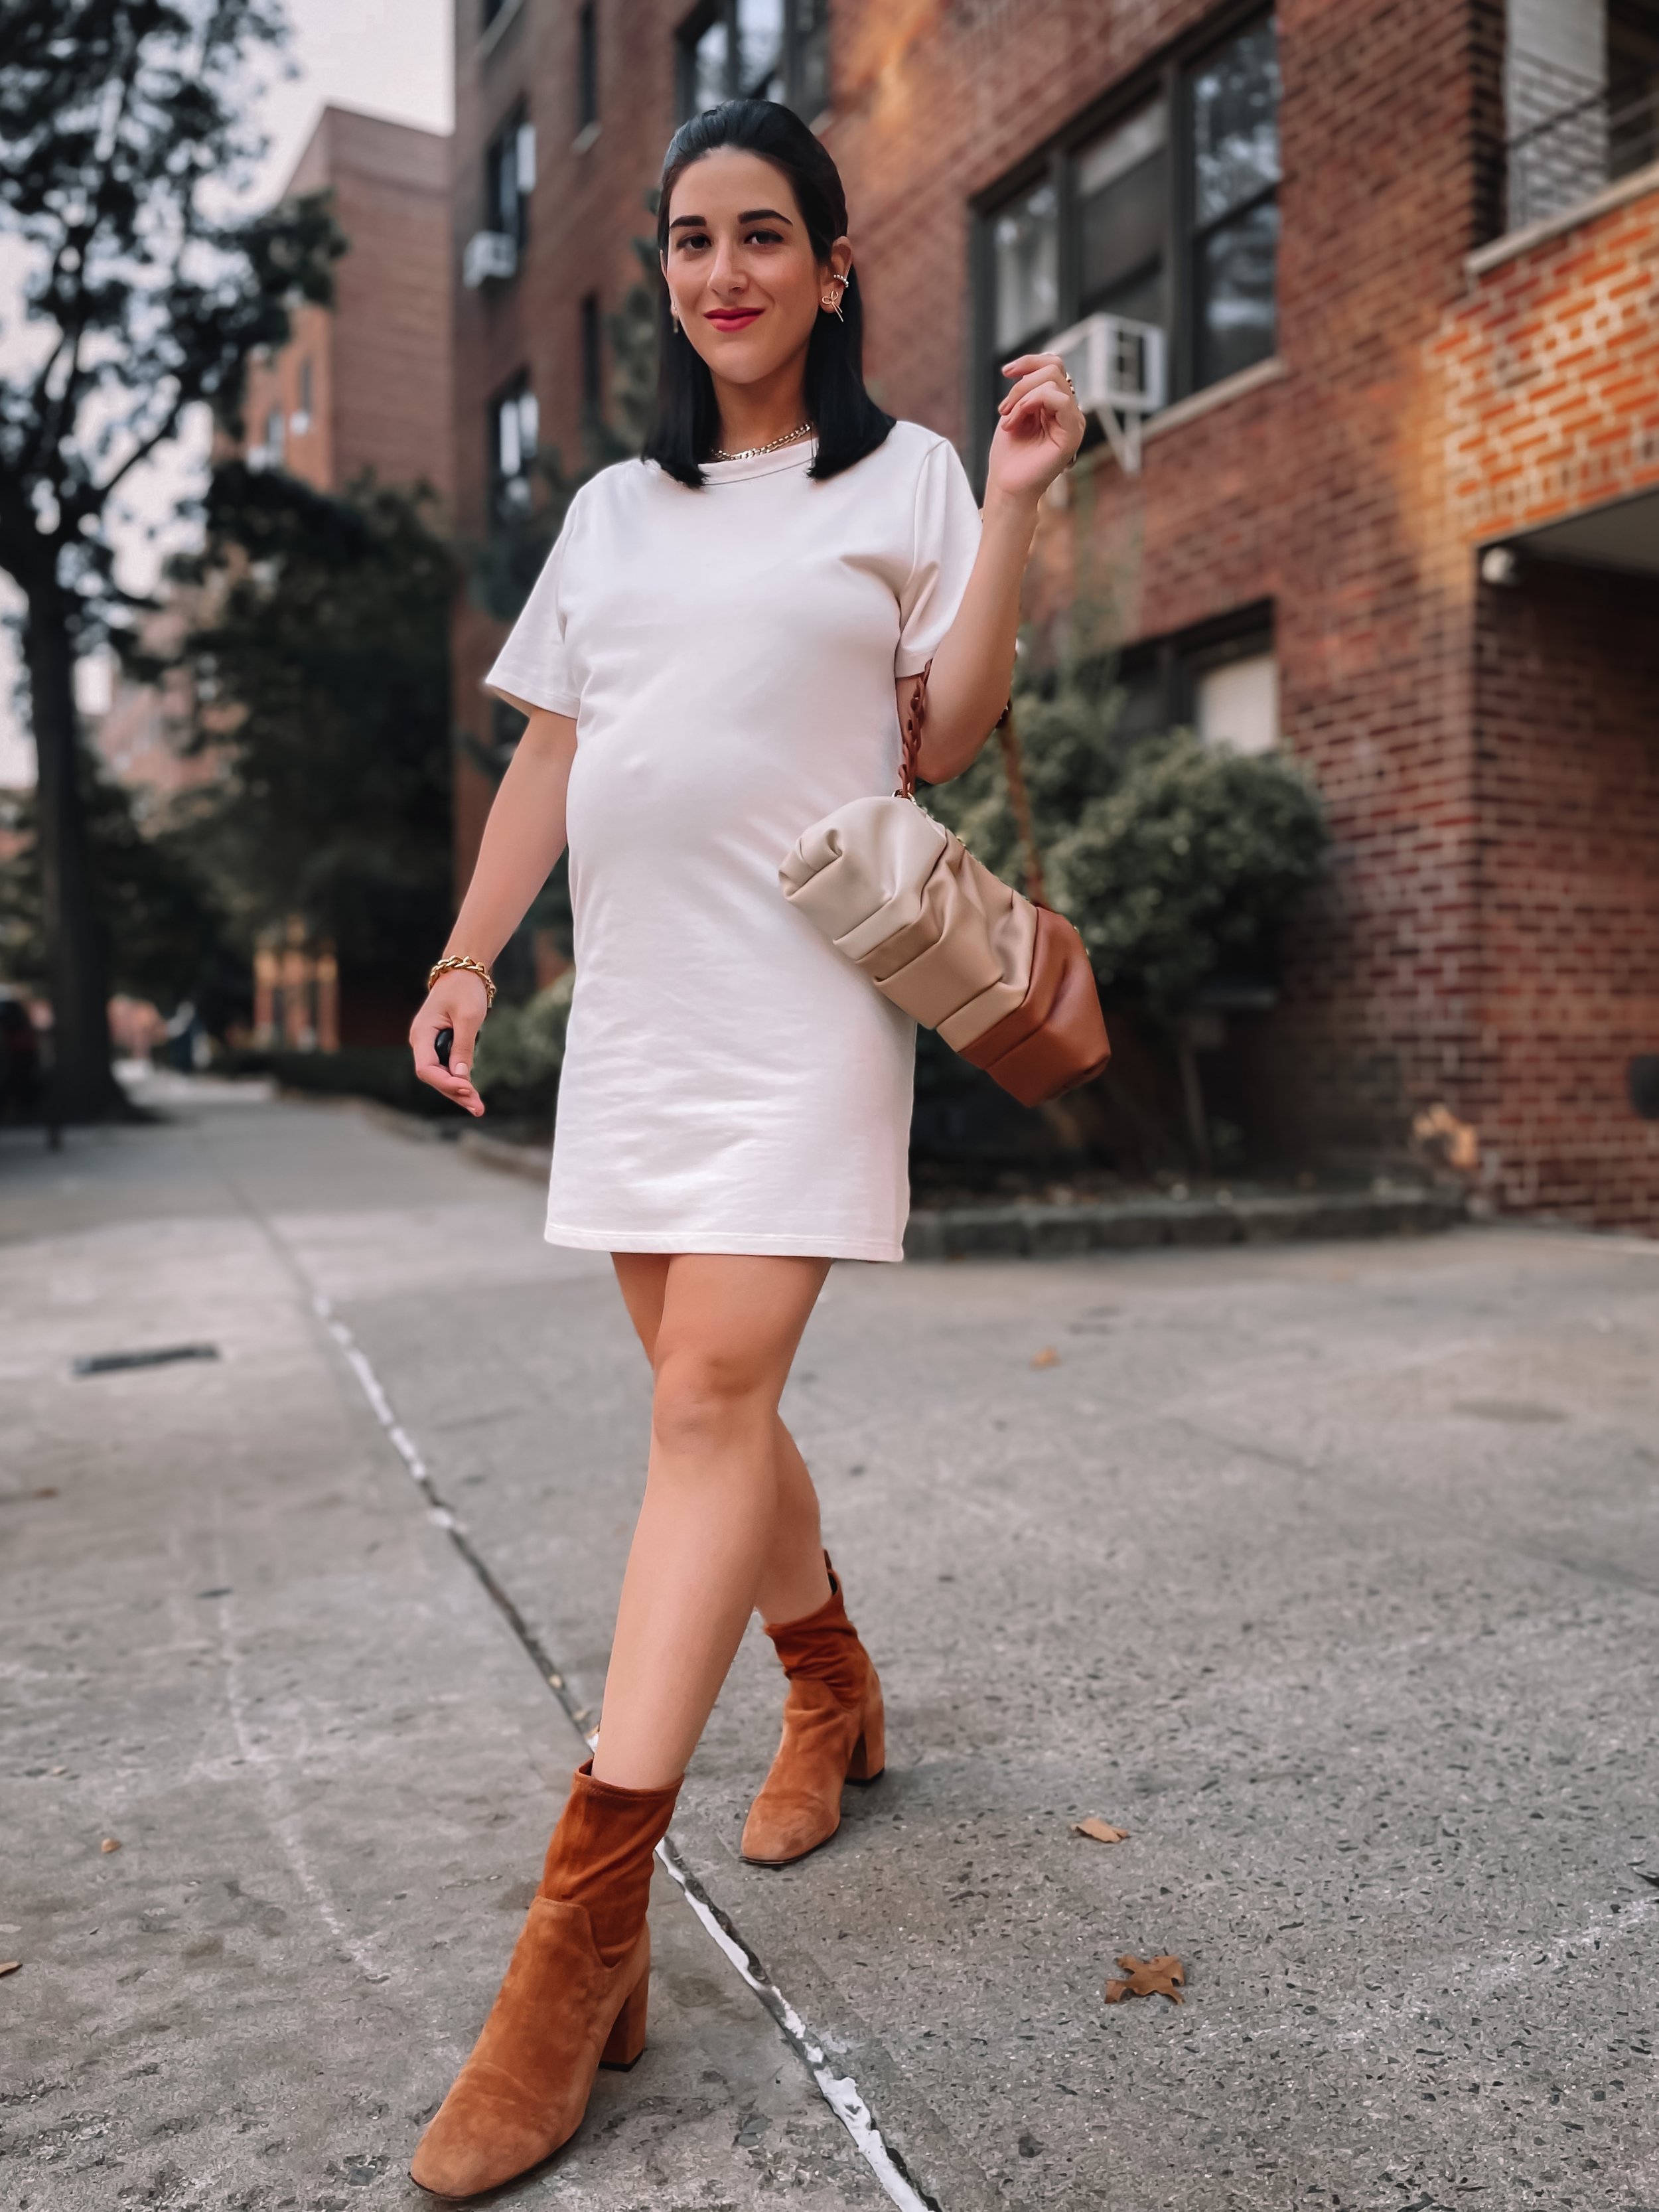 Cream T-Shirt Dress + Tan Booties 35 Week Update Roolee Vegan Leather Brown Bag Fall Look Outfit Esther Santer NYC Street Style Blogger Boots Colder Weather What To Wear Buy Bump Styled Bumpdate Pregnancy Fashion Maternity Trends Bow Earrings Pregnant.JPG